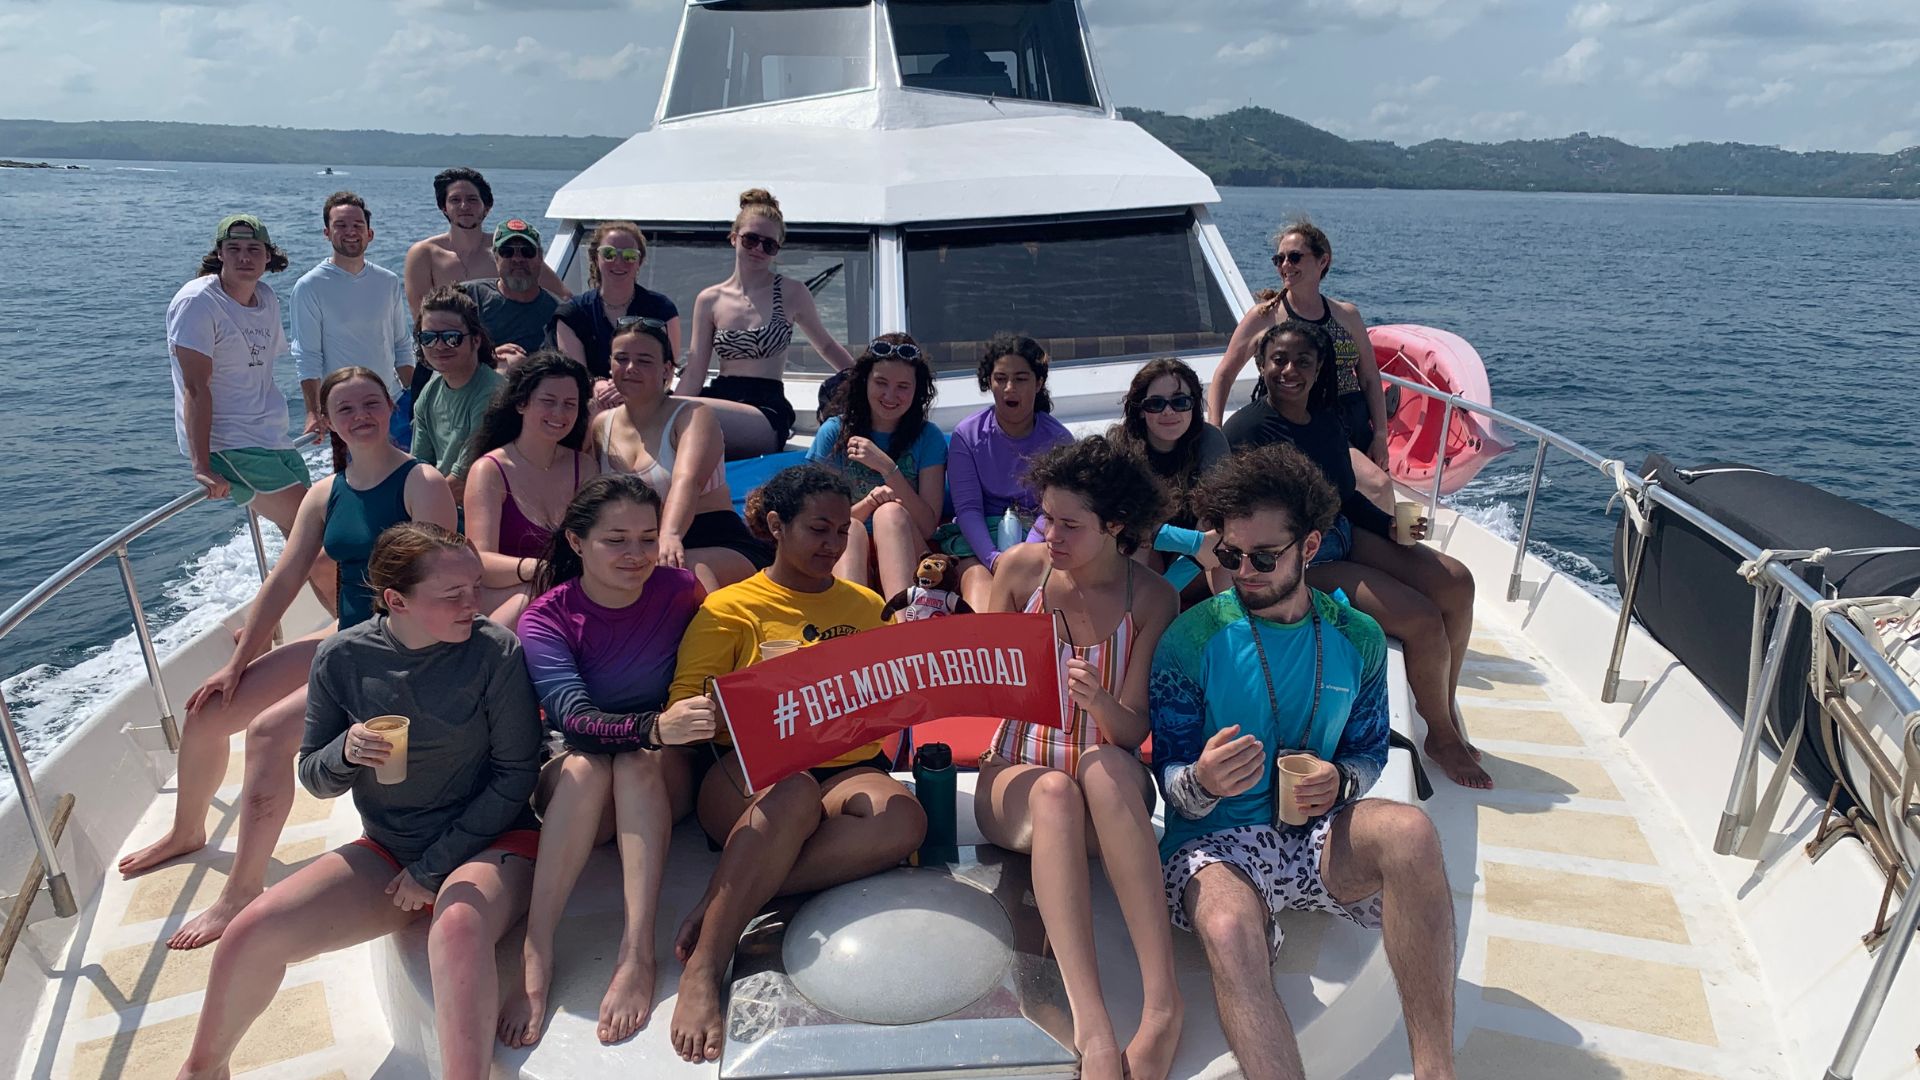 Students studying abroad in Costa Rica